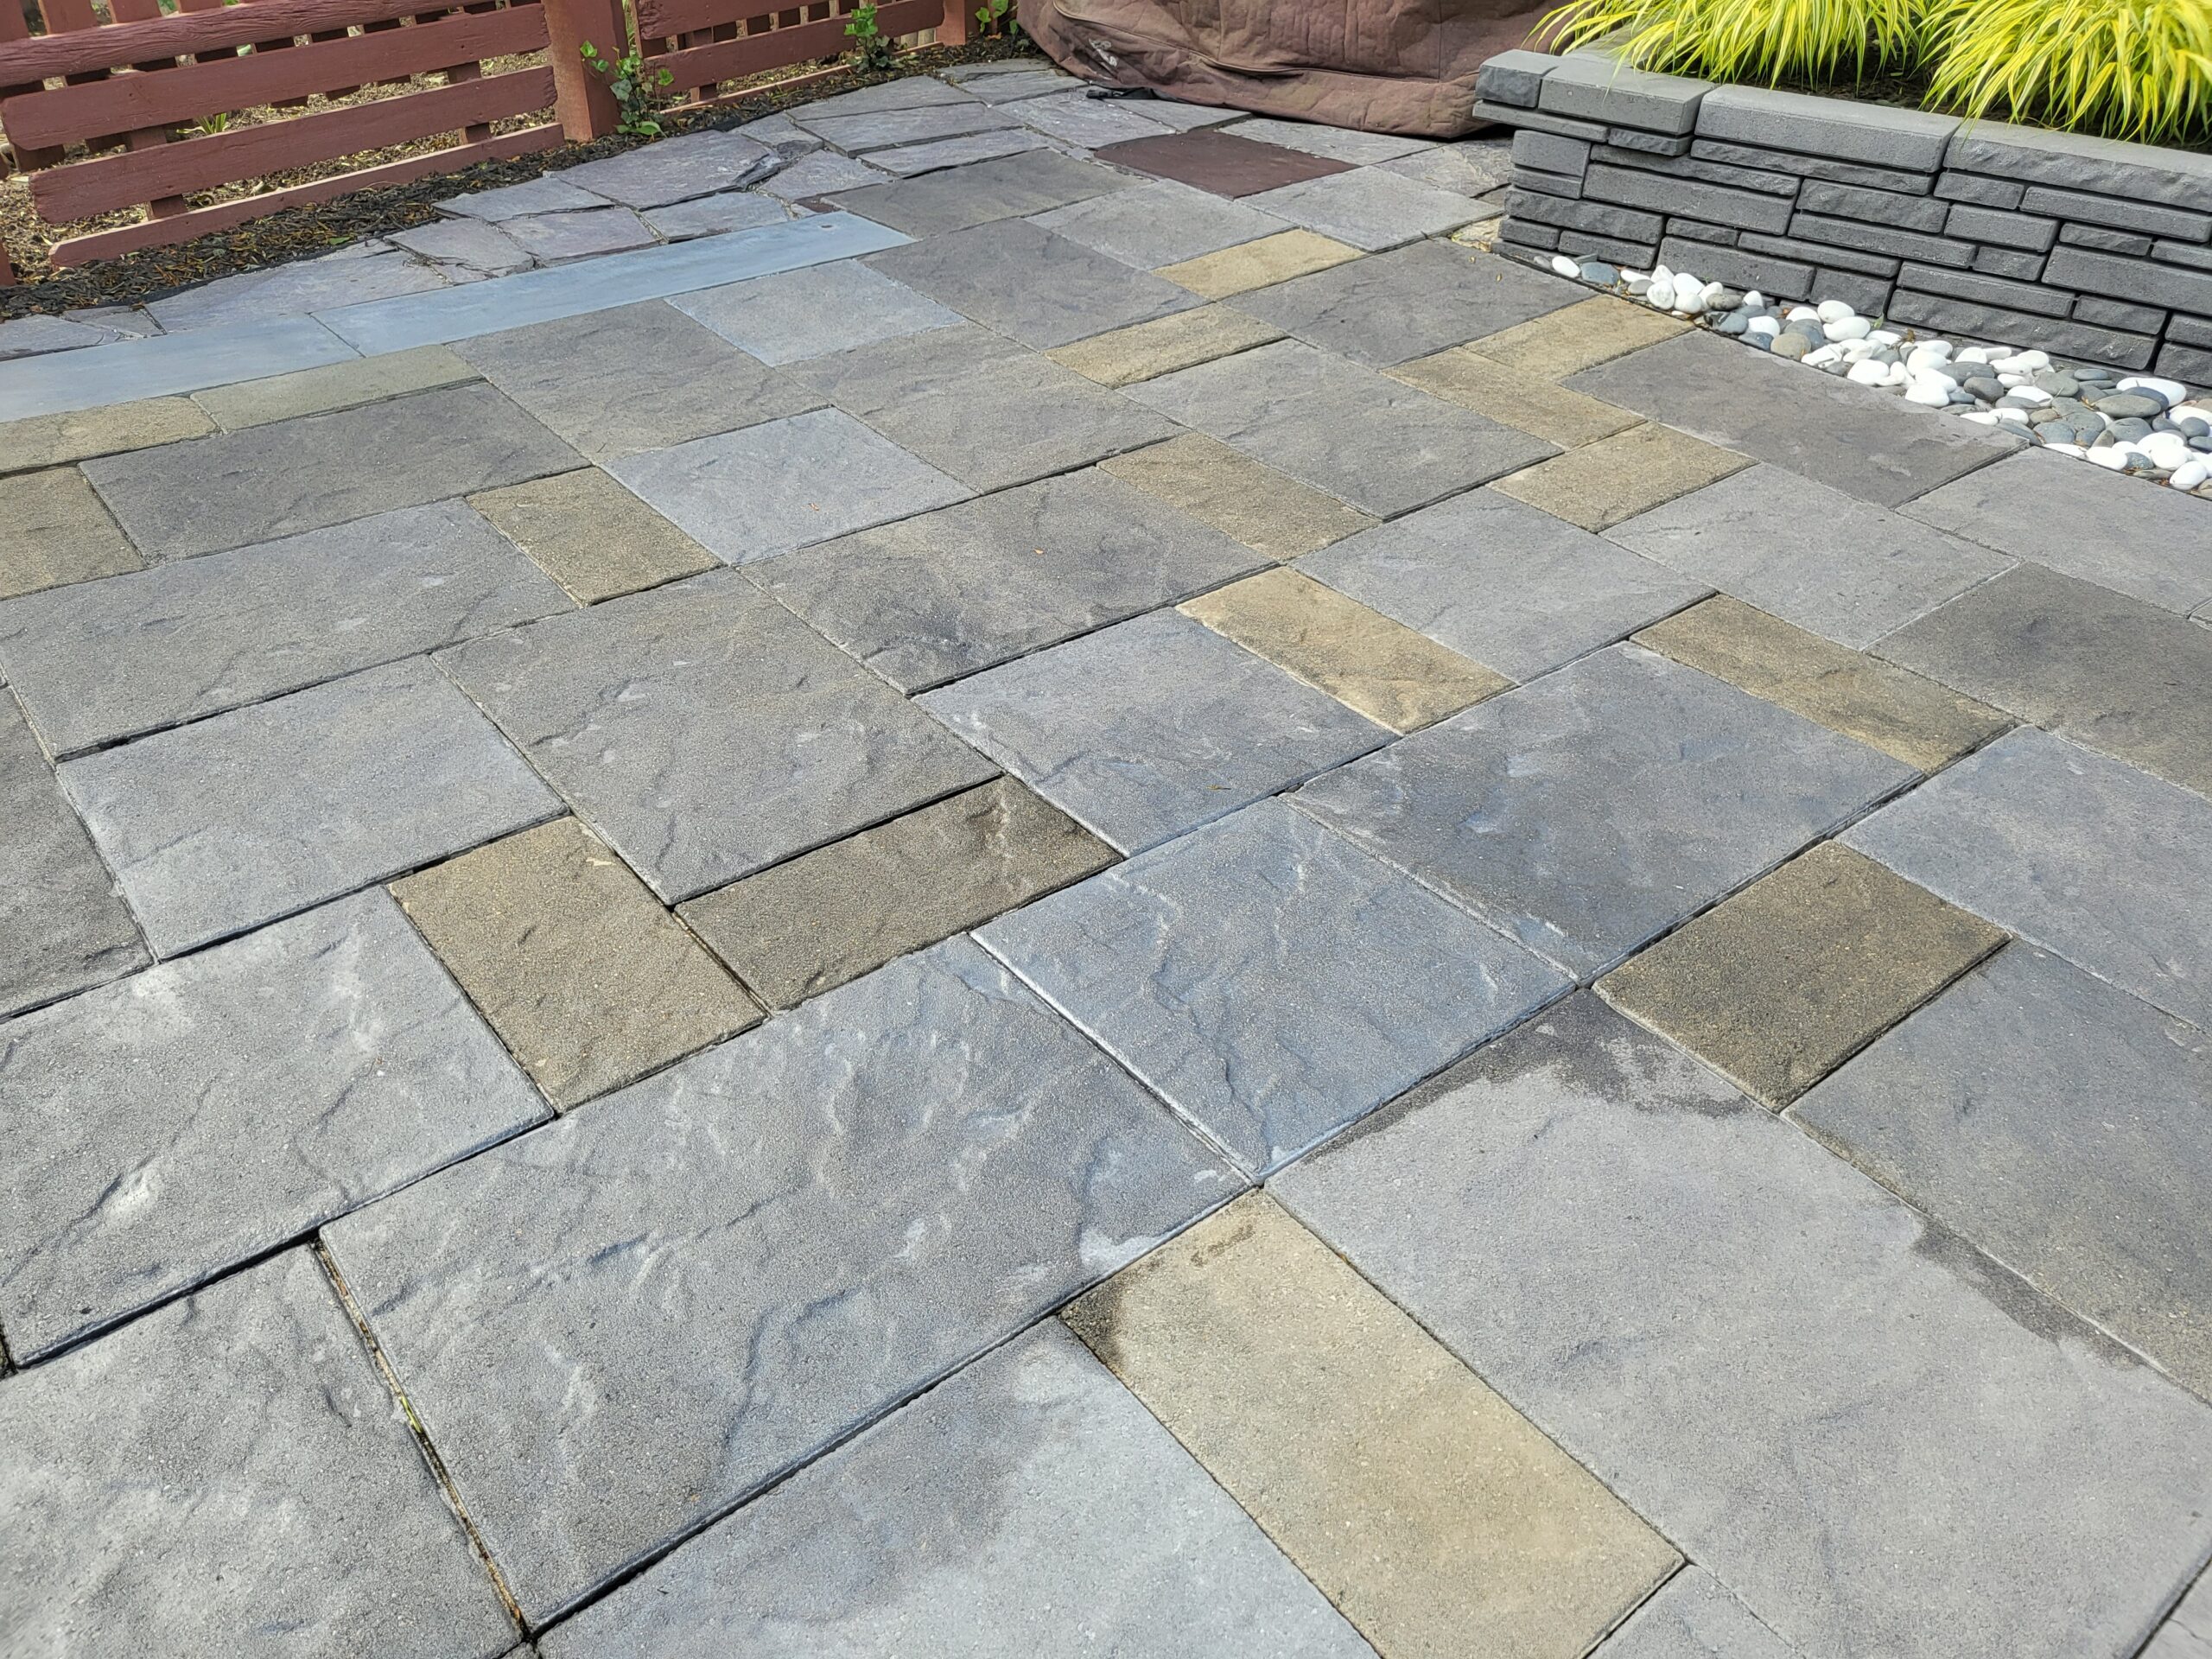 EasySeal drying highlighting the intricate texture and rich combination of Silver Gray, Light Charcoal, and Tweed Antiquing stains on the slate-stamped concrete patio, revealing the stunning transformation and depth of colors